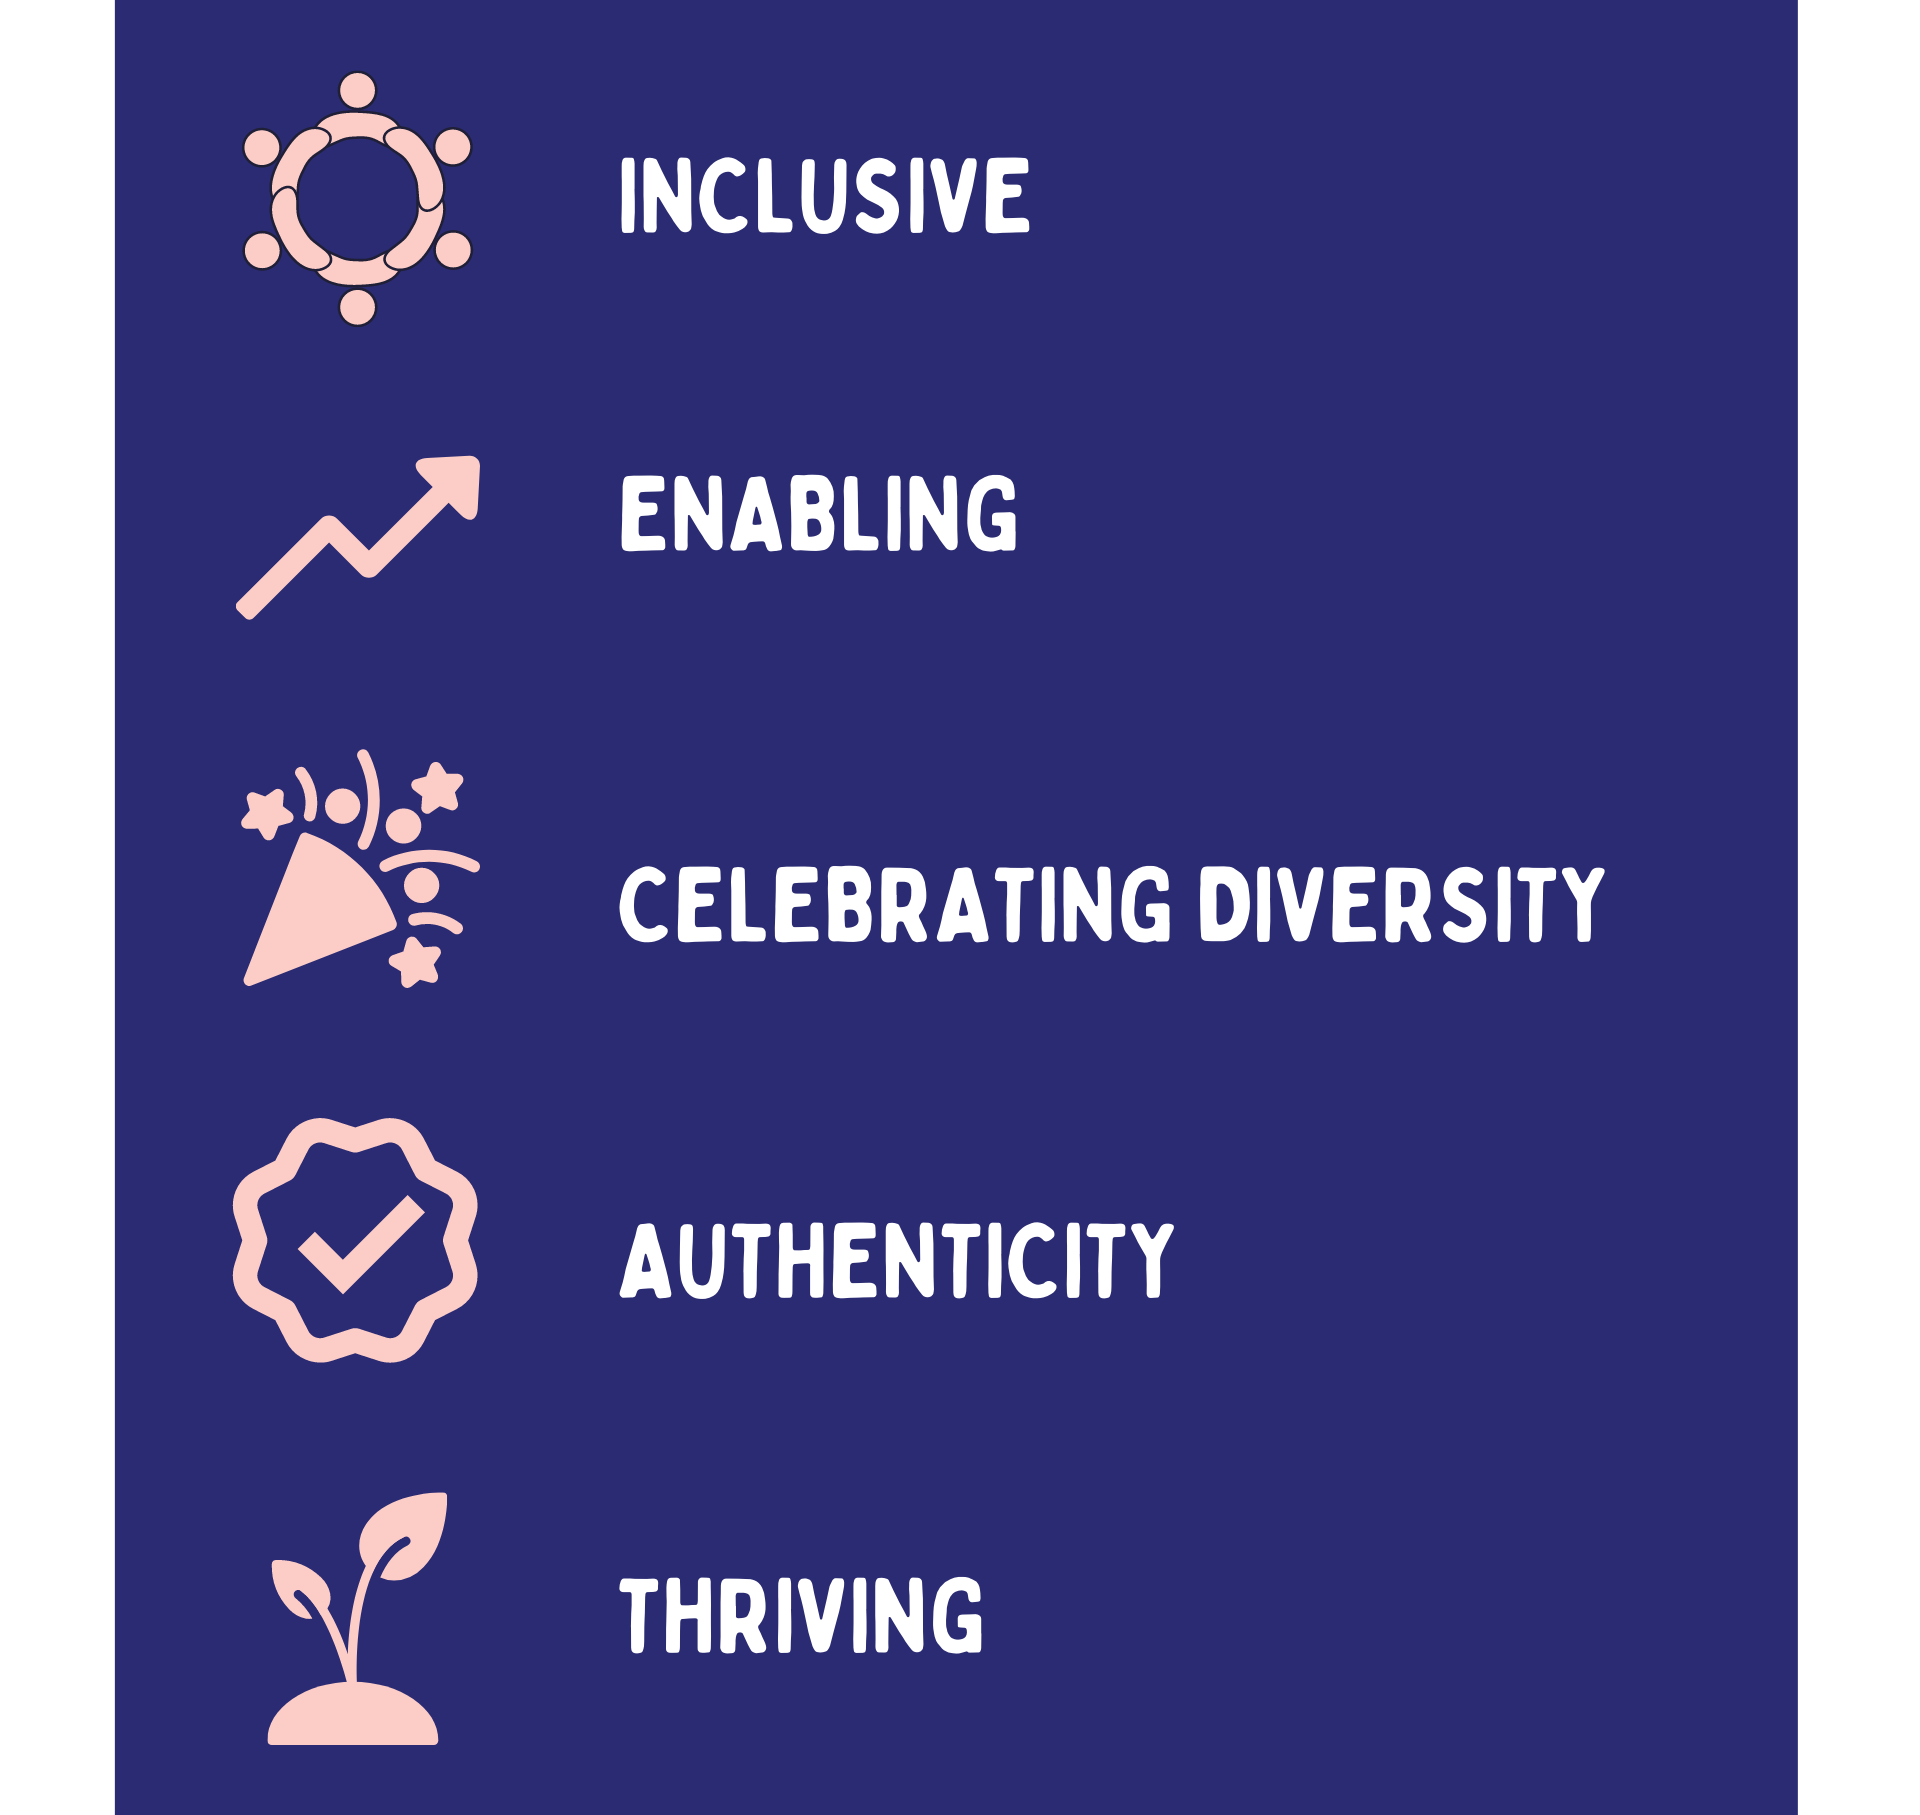 Inclusive, enabling, celebrating diversity, authenticity, thriving.